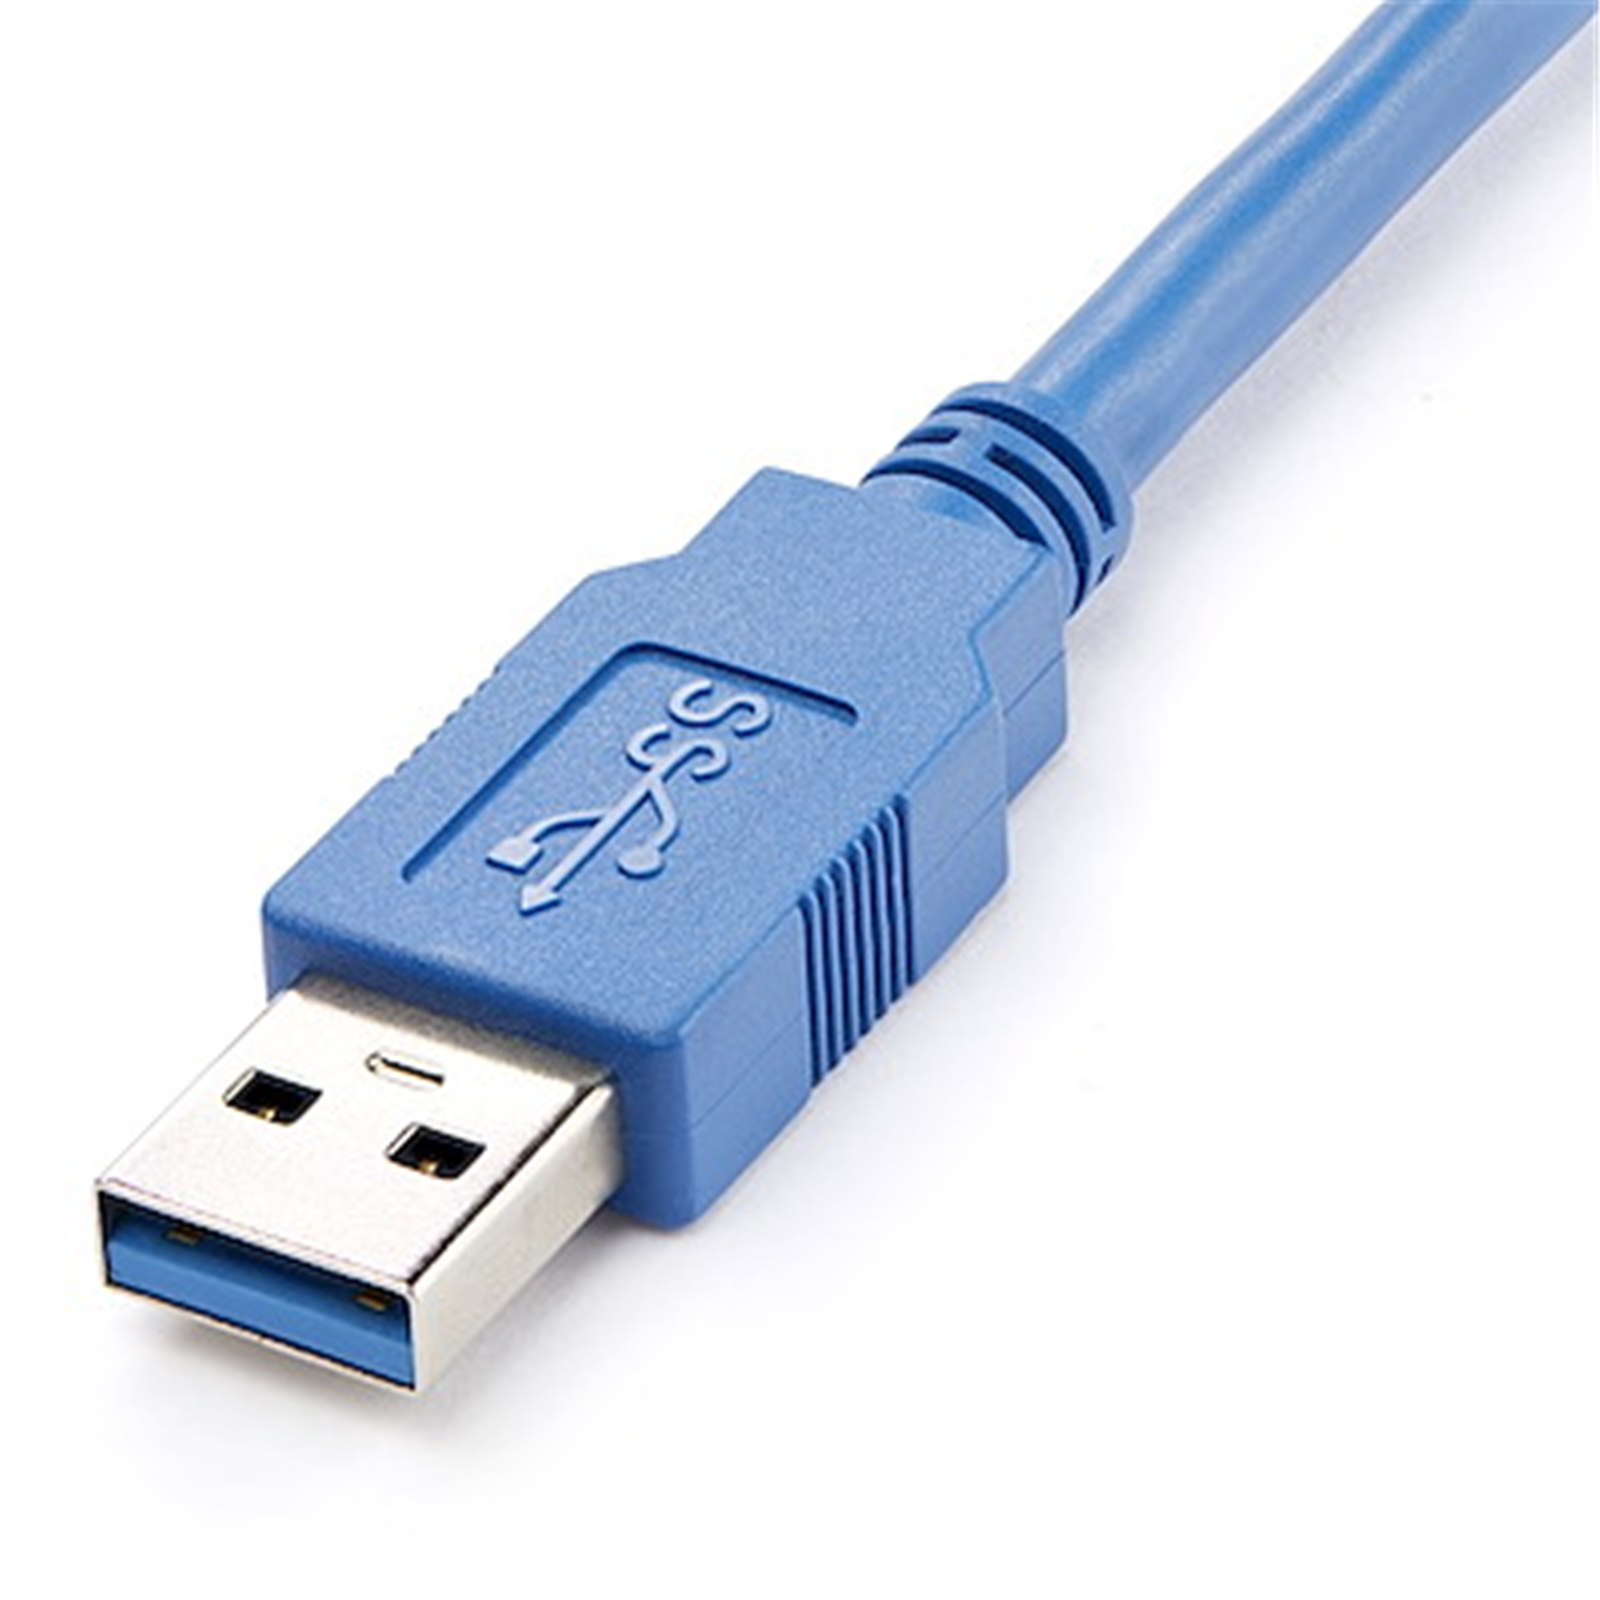 Usb 3.2 gen 1 type a. USB 3.0 Extender Cable.. Cable Extension USB3.0 5m. Кабель USB 3.0 SUPERSPEED USB 3.0. Кабель USB 3.0 SUPERSPEED USB 3.0 19 Pin.